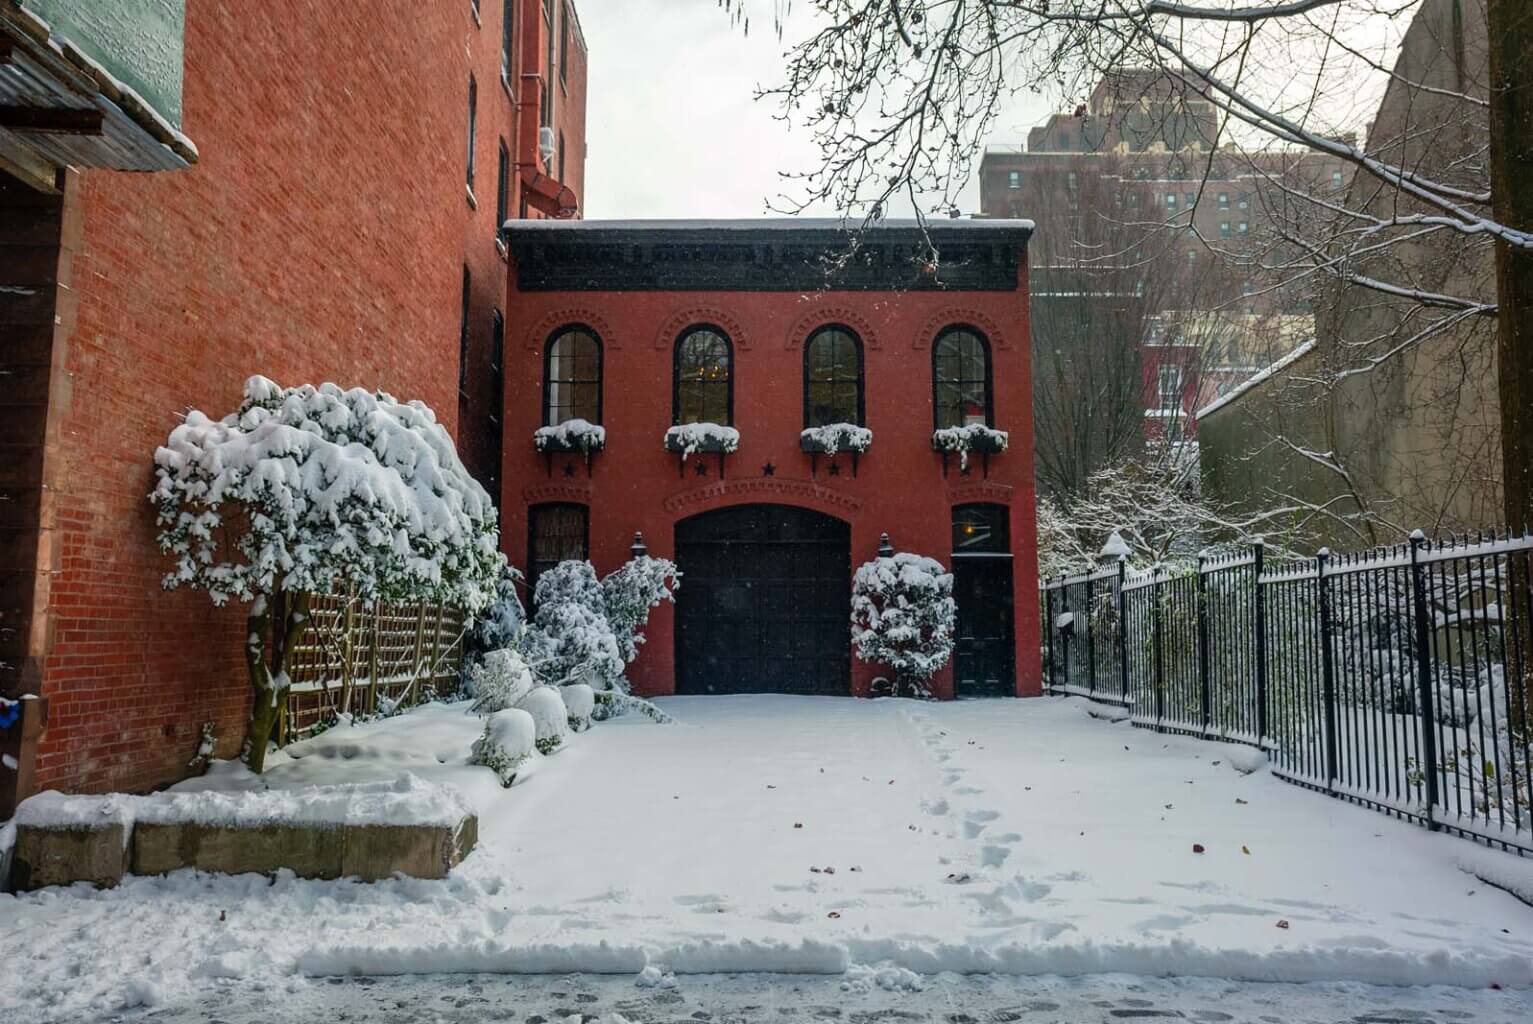 A row house in brooklyn heights covered in snow